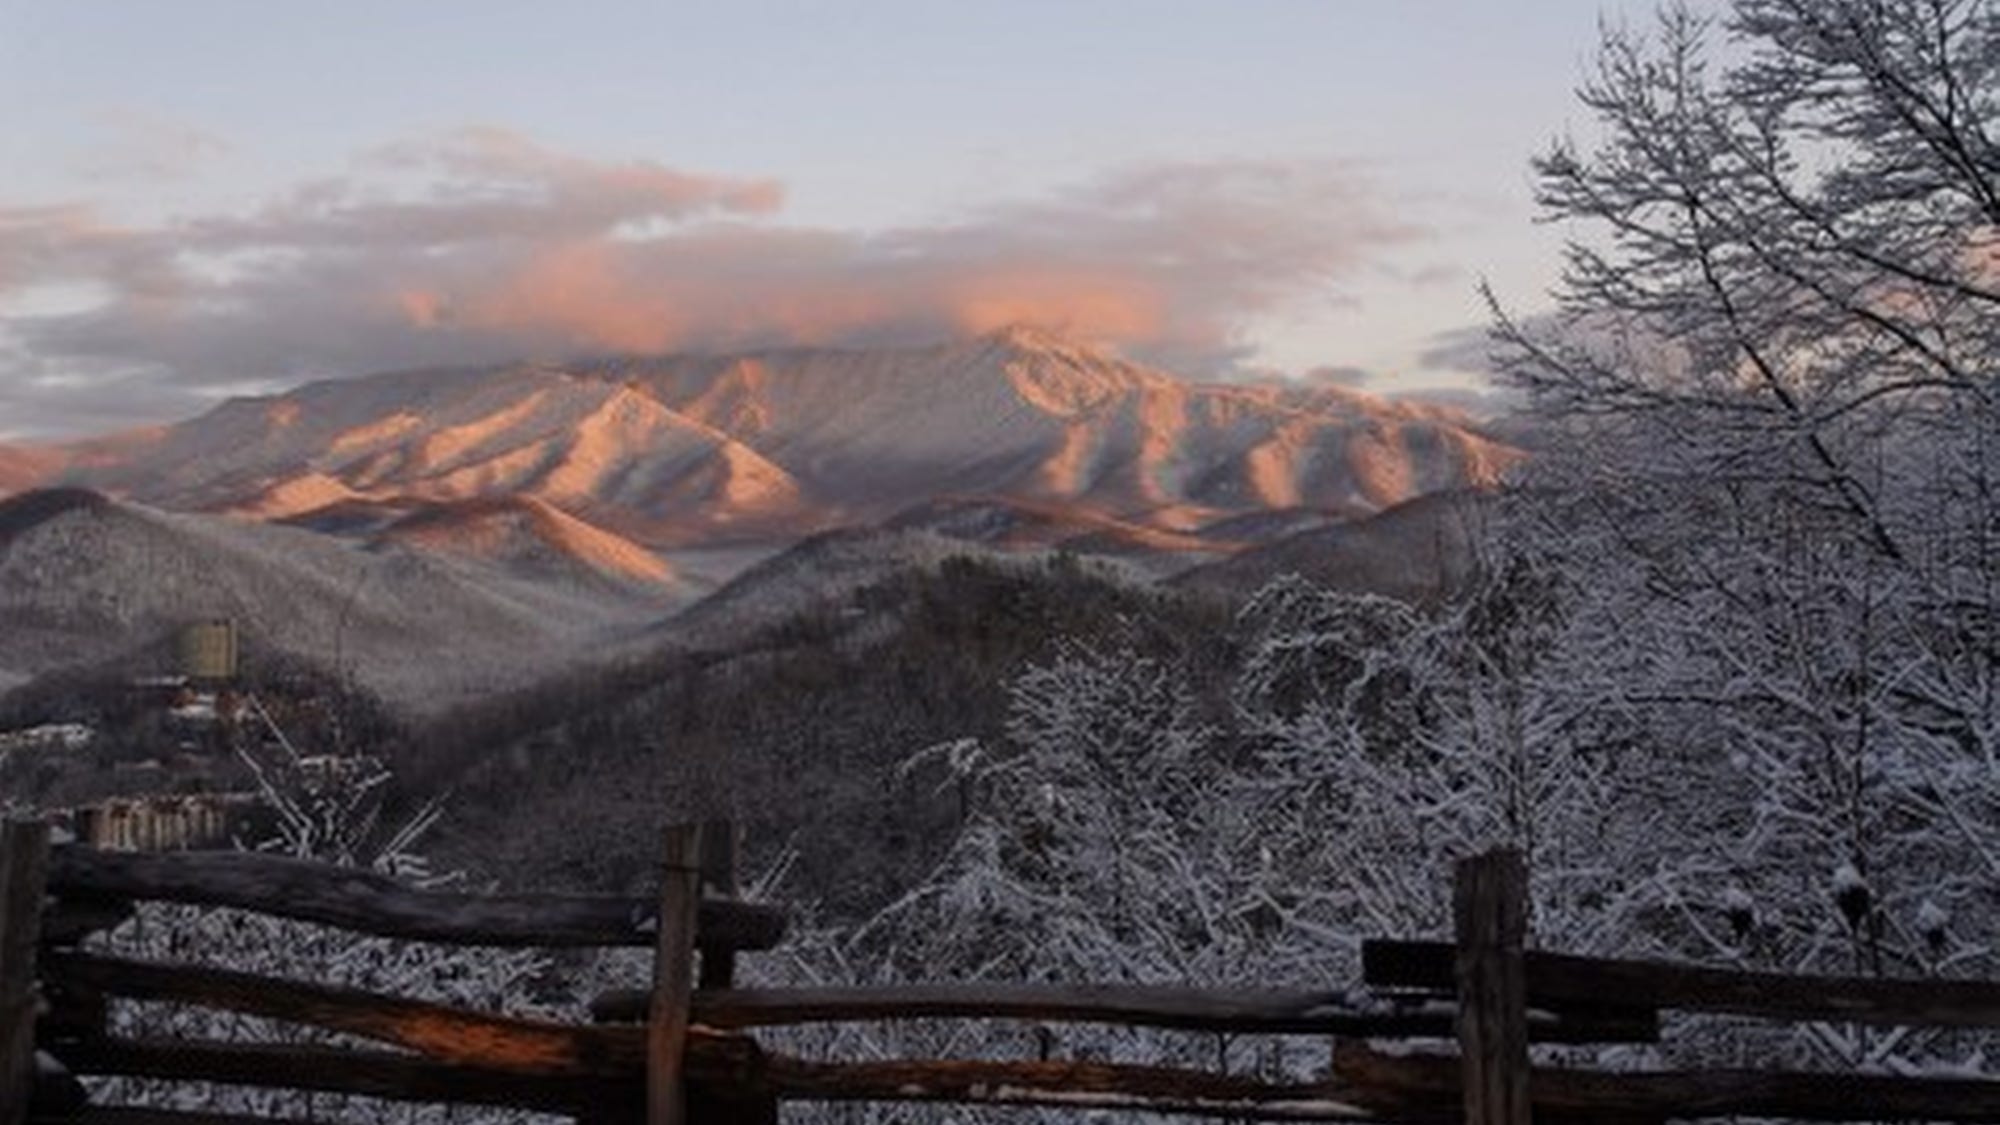 things to do in pigeon forge in december